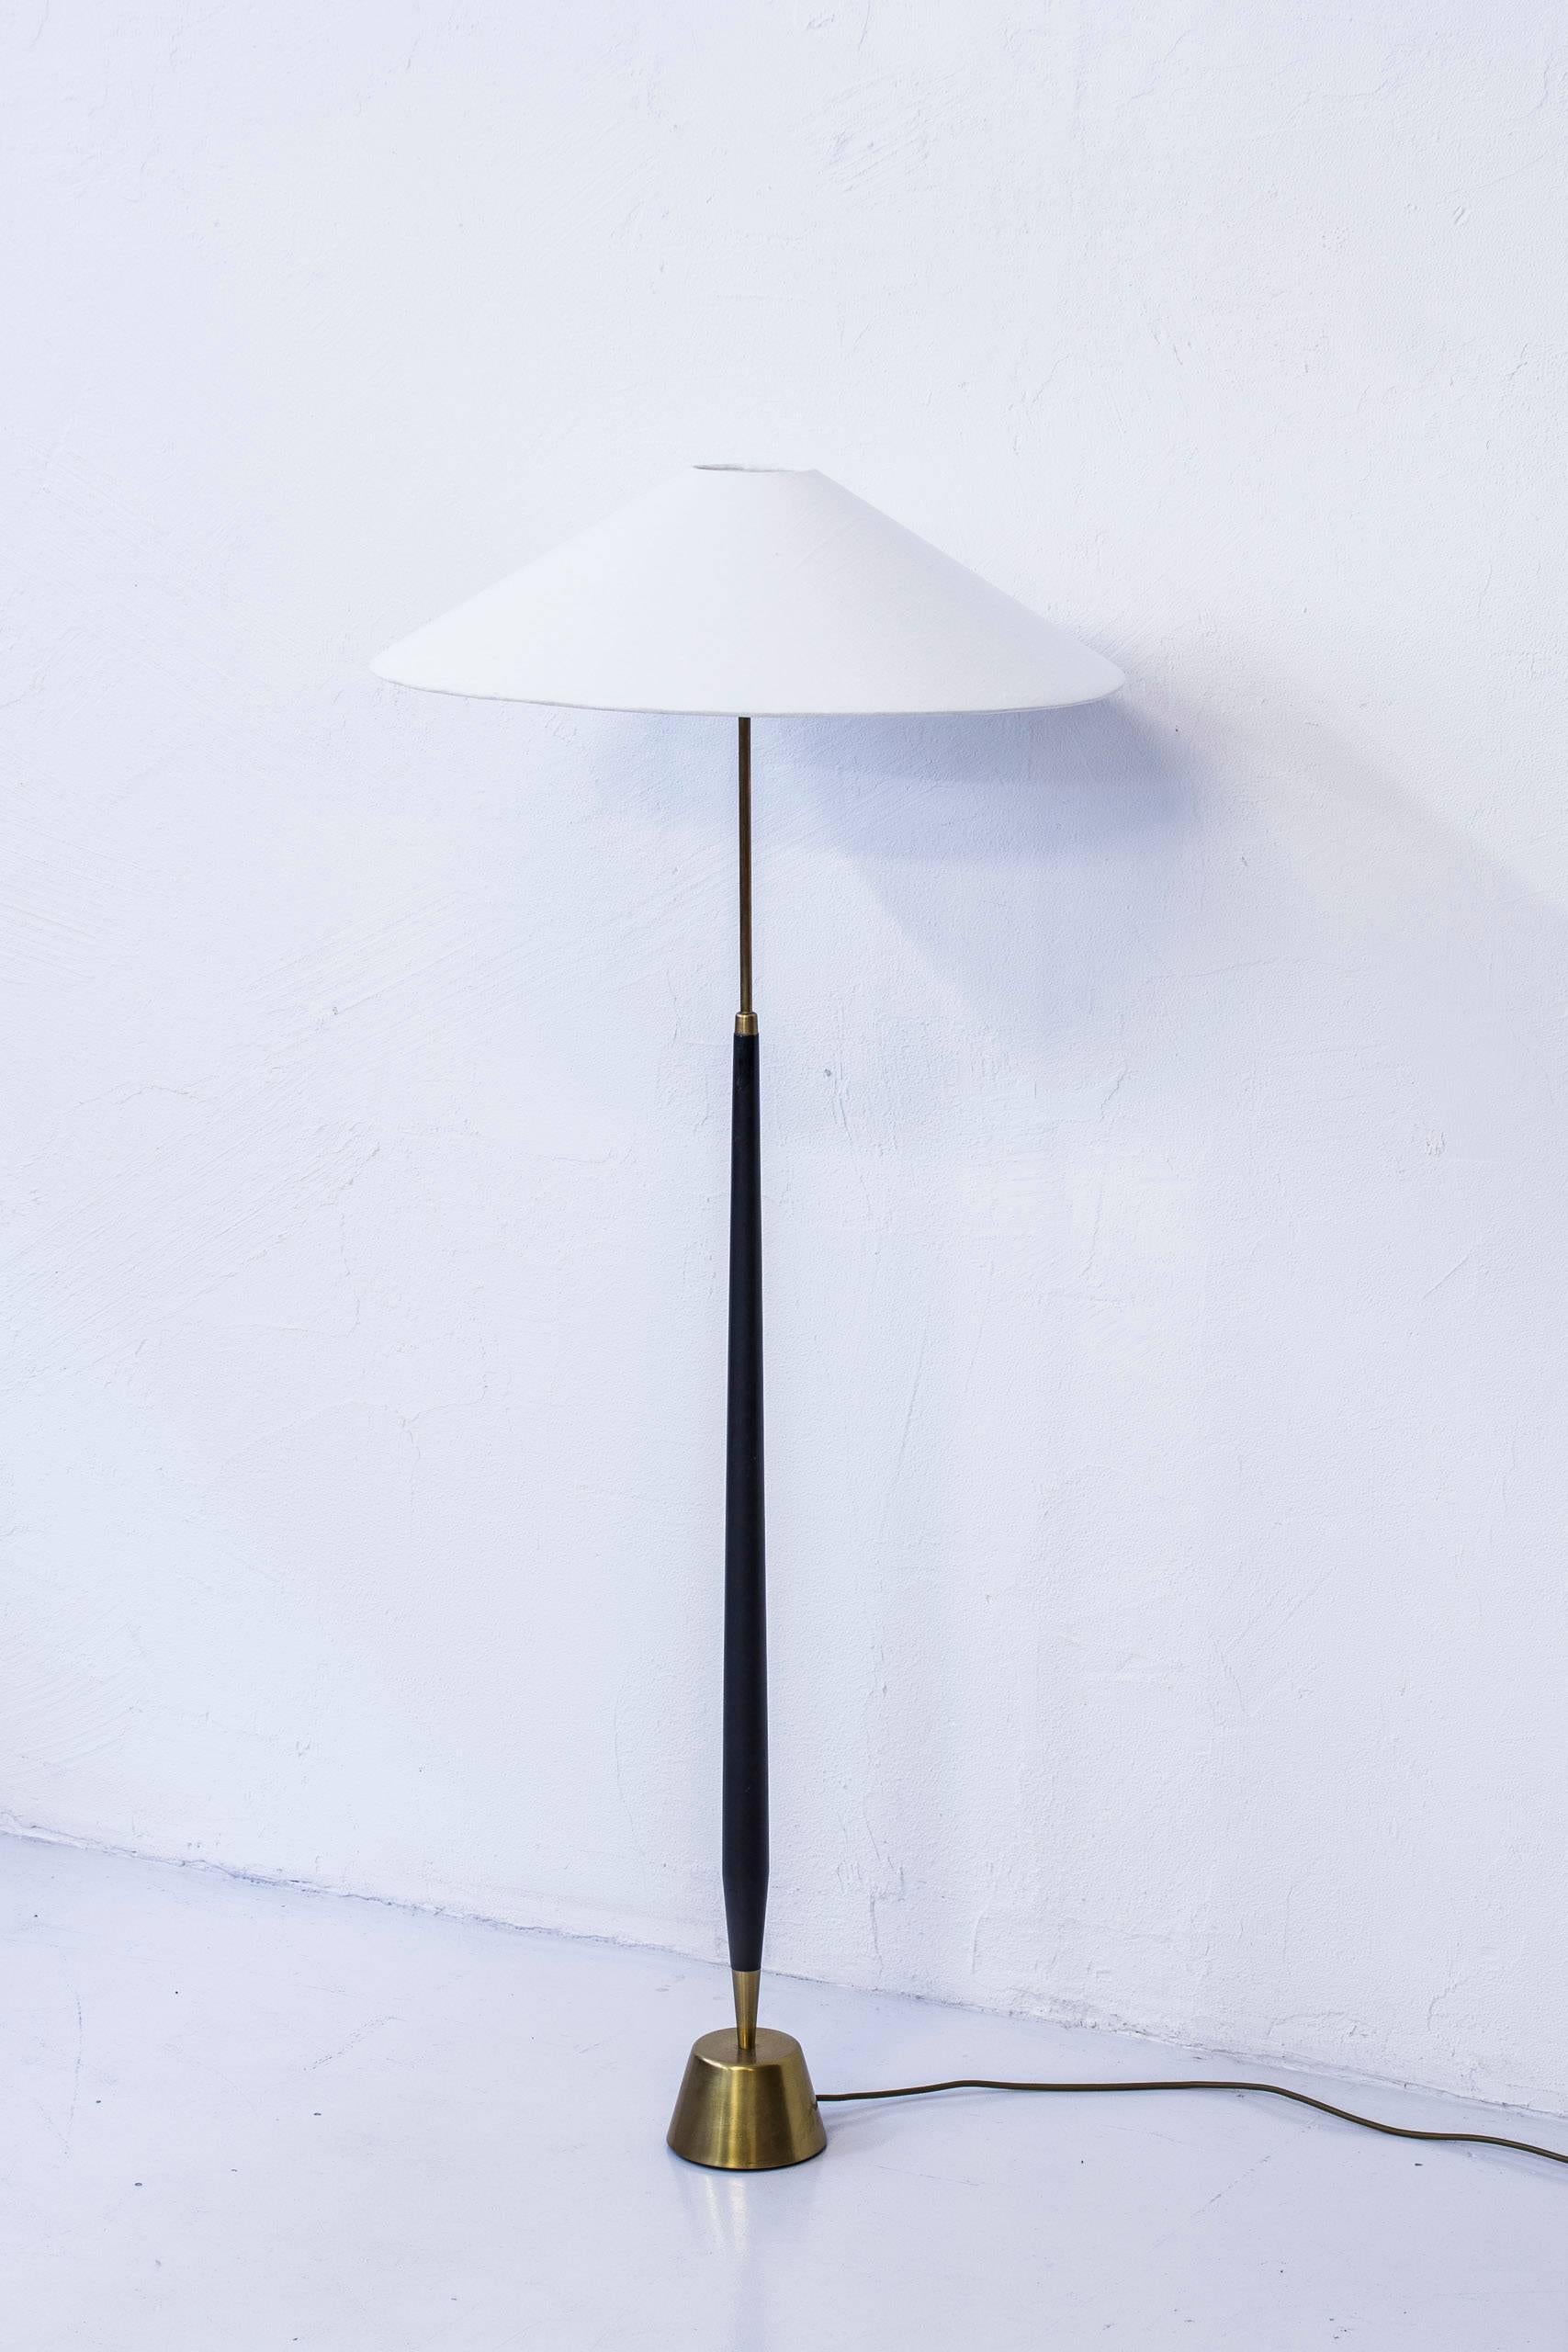 Floor lamp produced in Sweden during the 1950s by ASEA Belysning. Made from black lacquered wood and polished brass. With a heavy cast iron weight in the base. Lampshade in off-white, textured linnen fabric. Original light switch on the lamp fixture